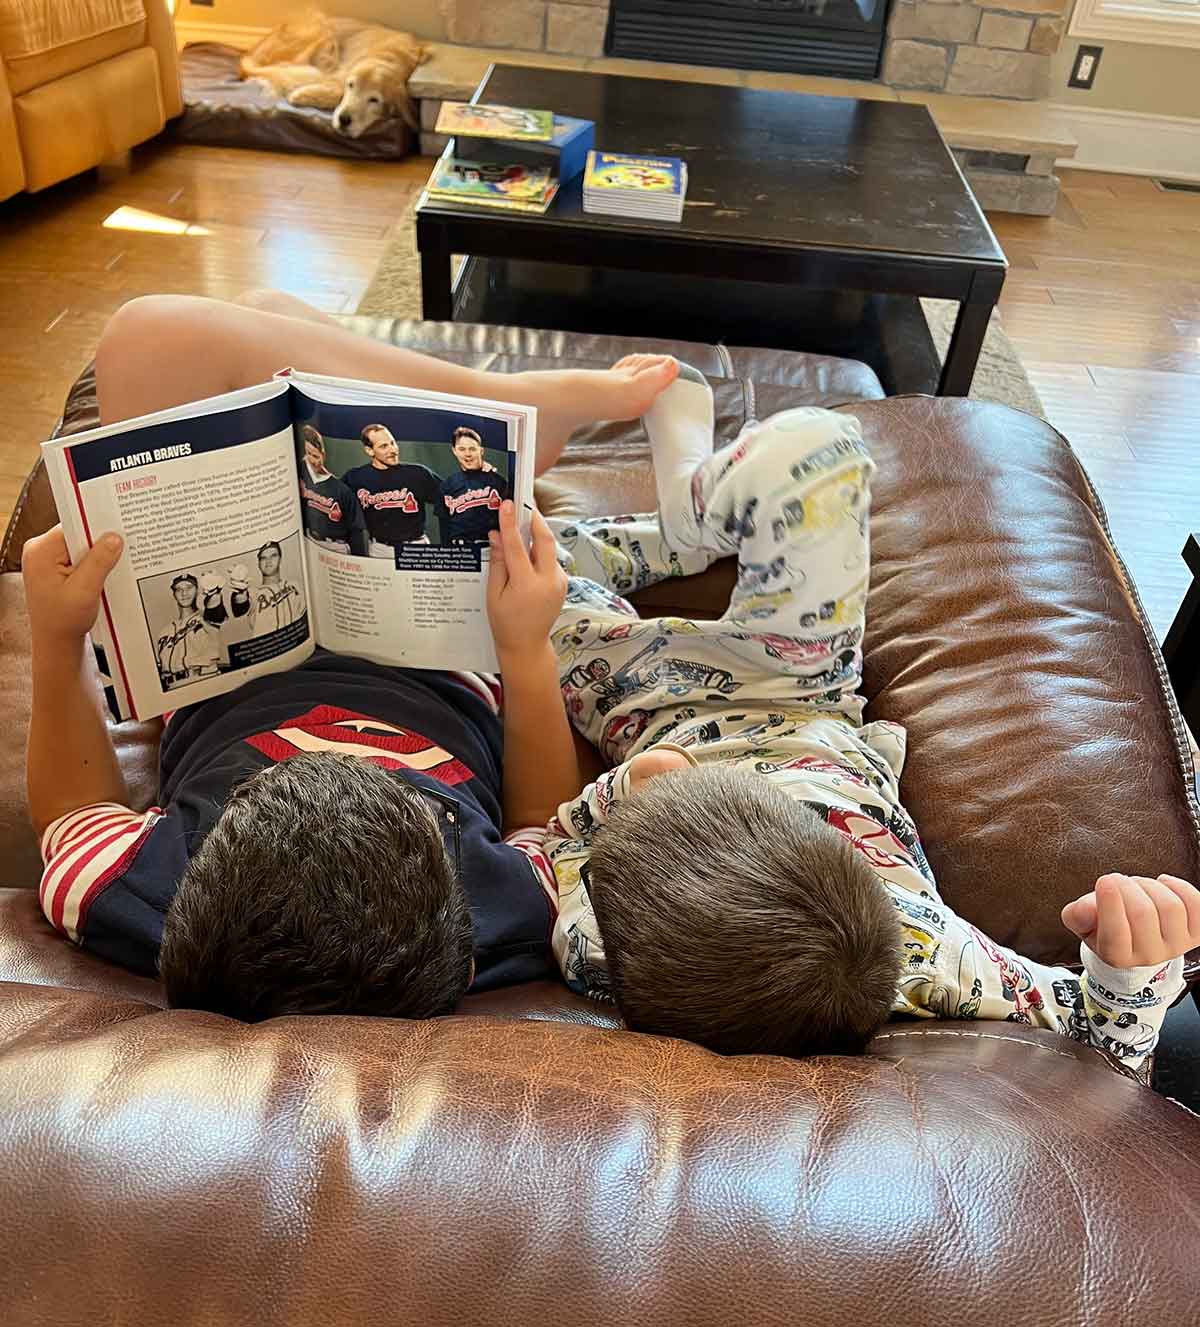 Two boys sitting next to each other on a couch looking at a baseball magazine.